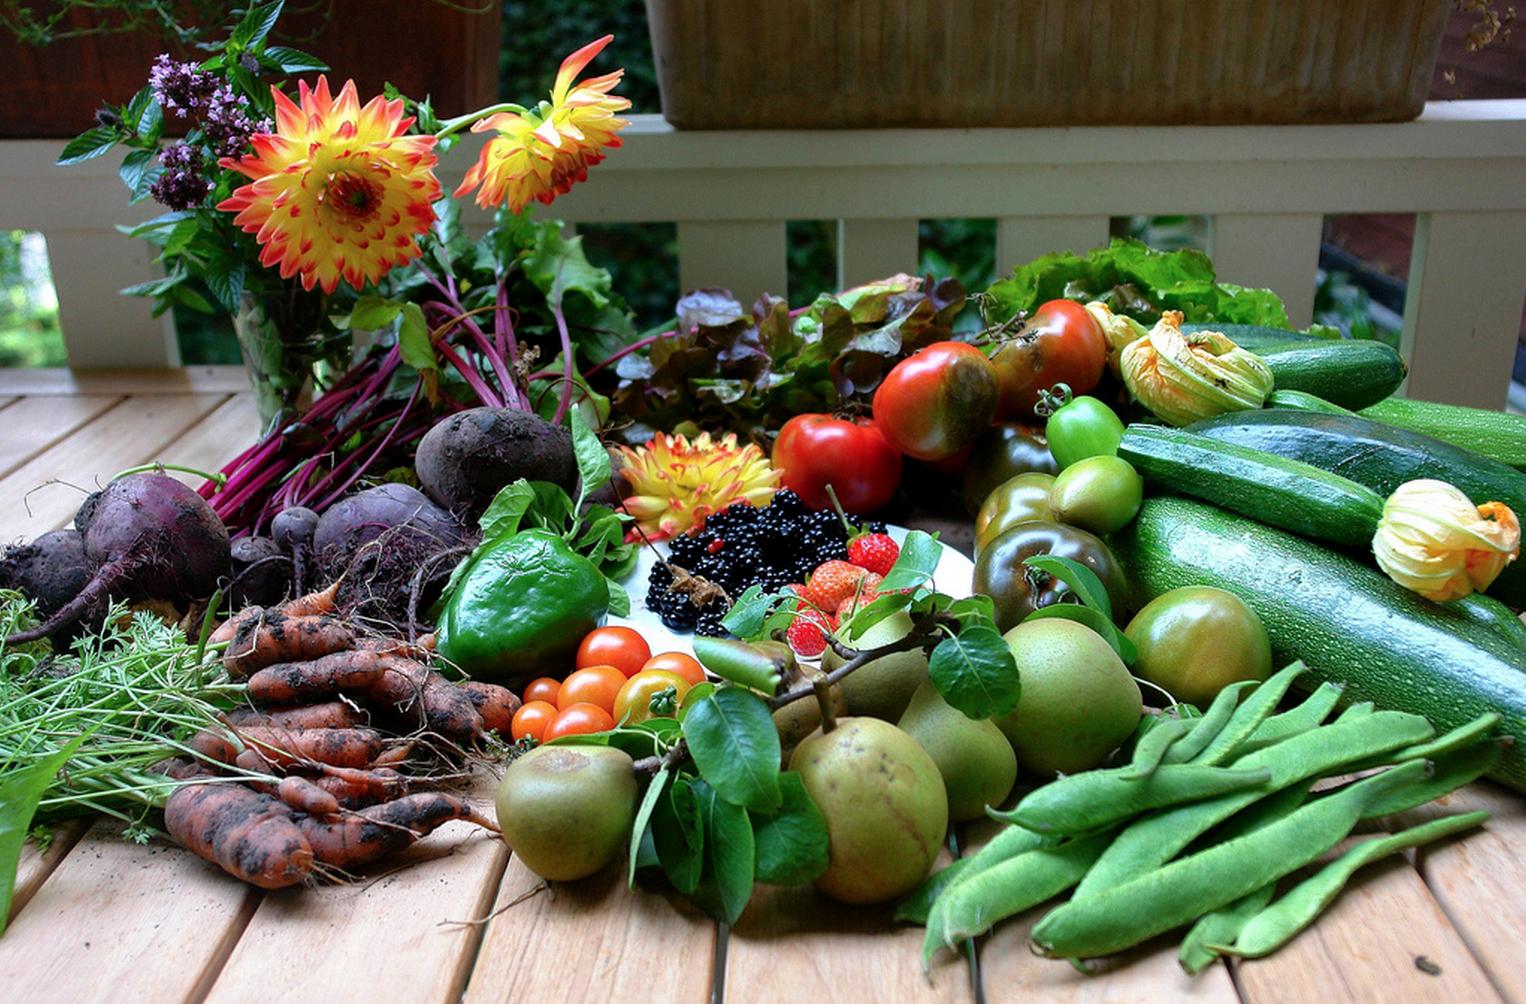 How to Grow a Organic Garden at Your Home
